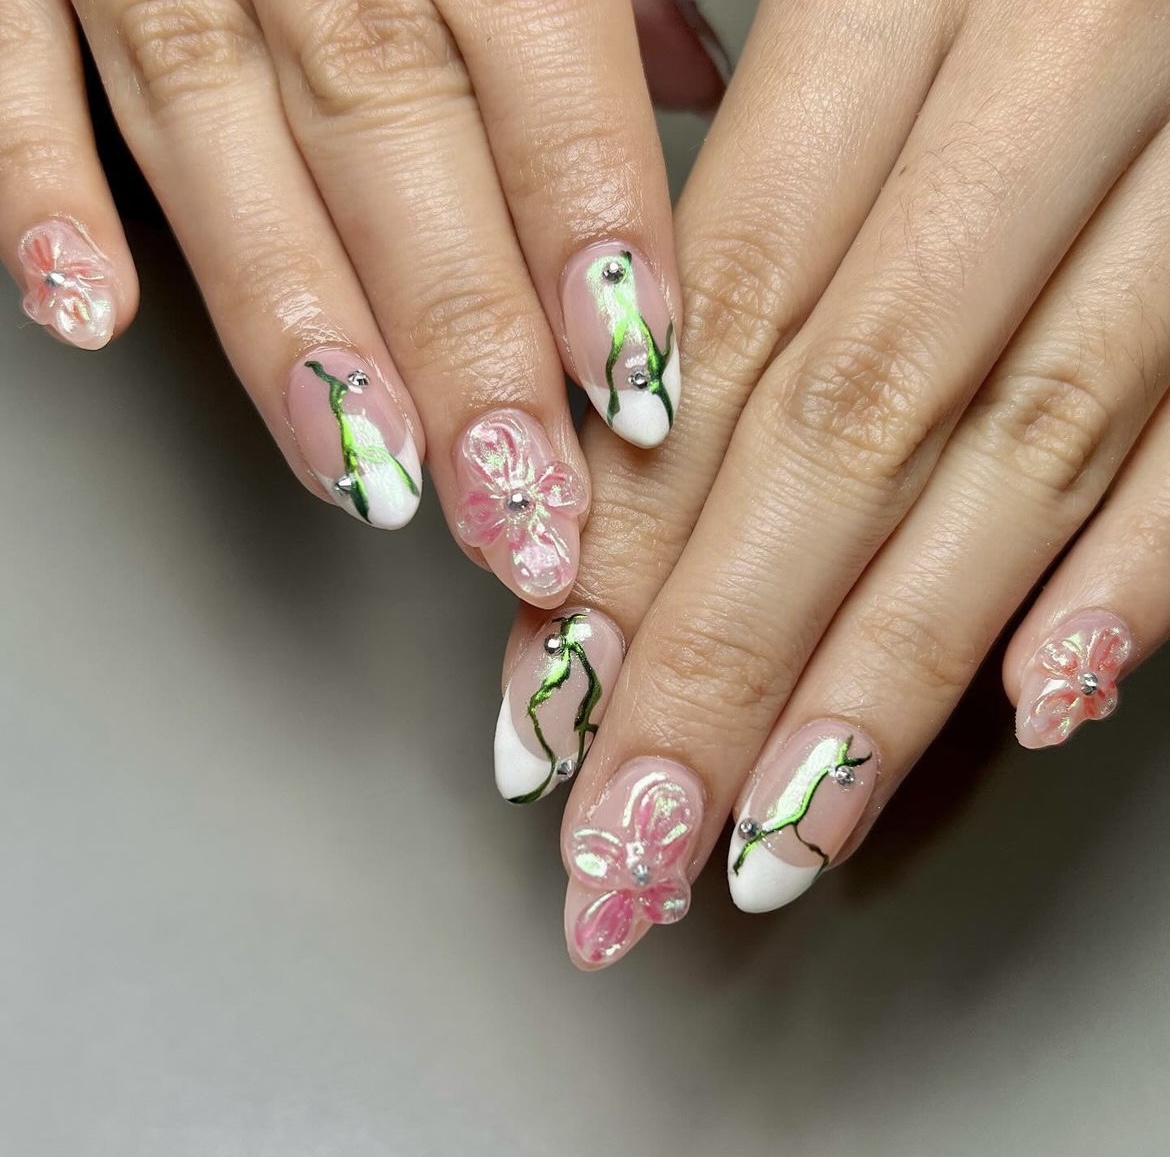 10 dos and don'ts during your nail appointment